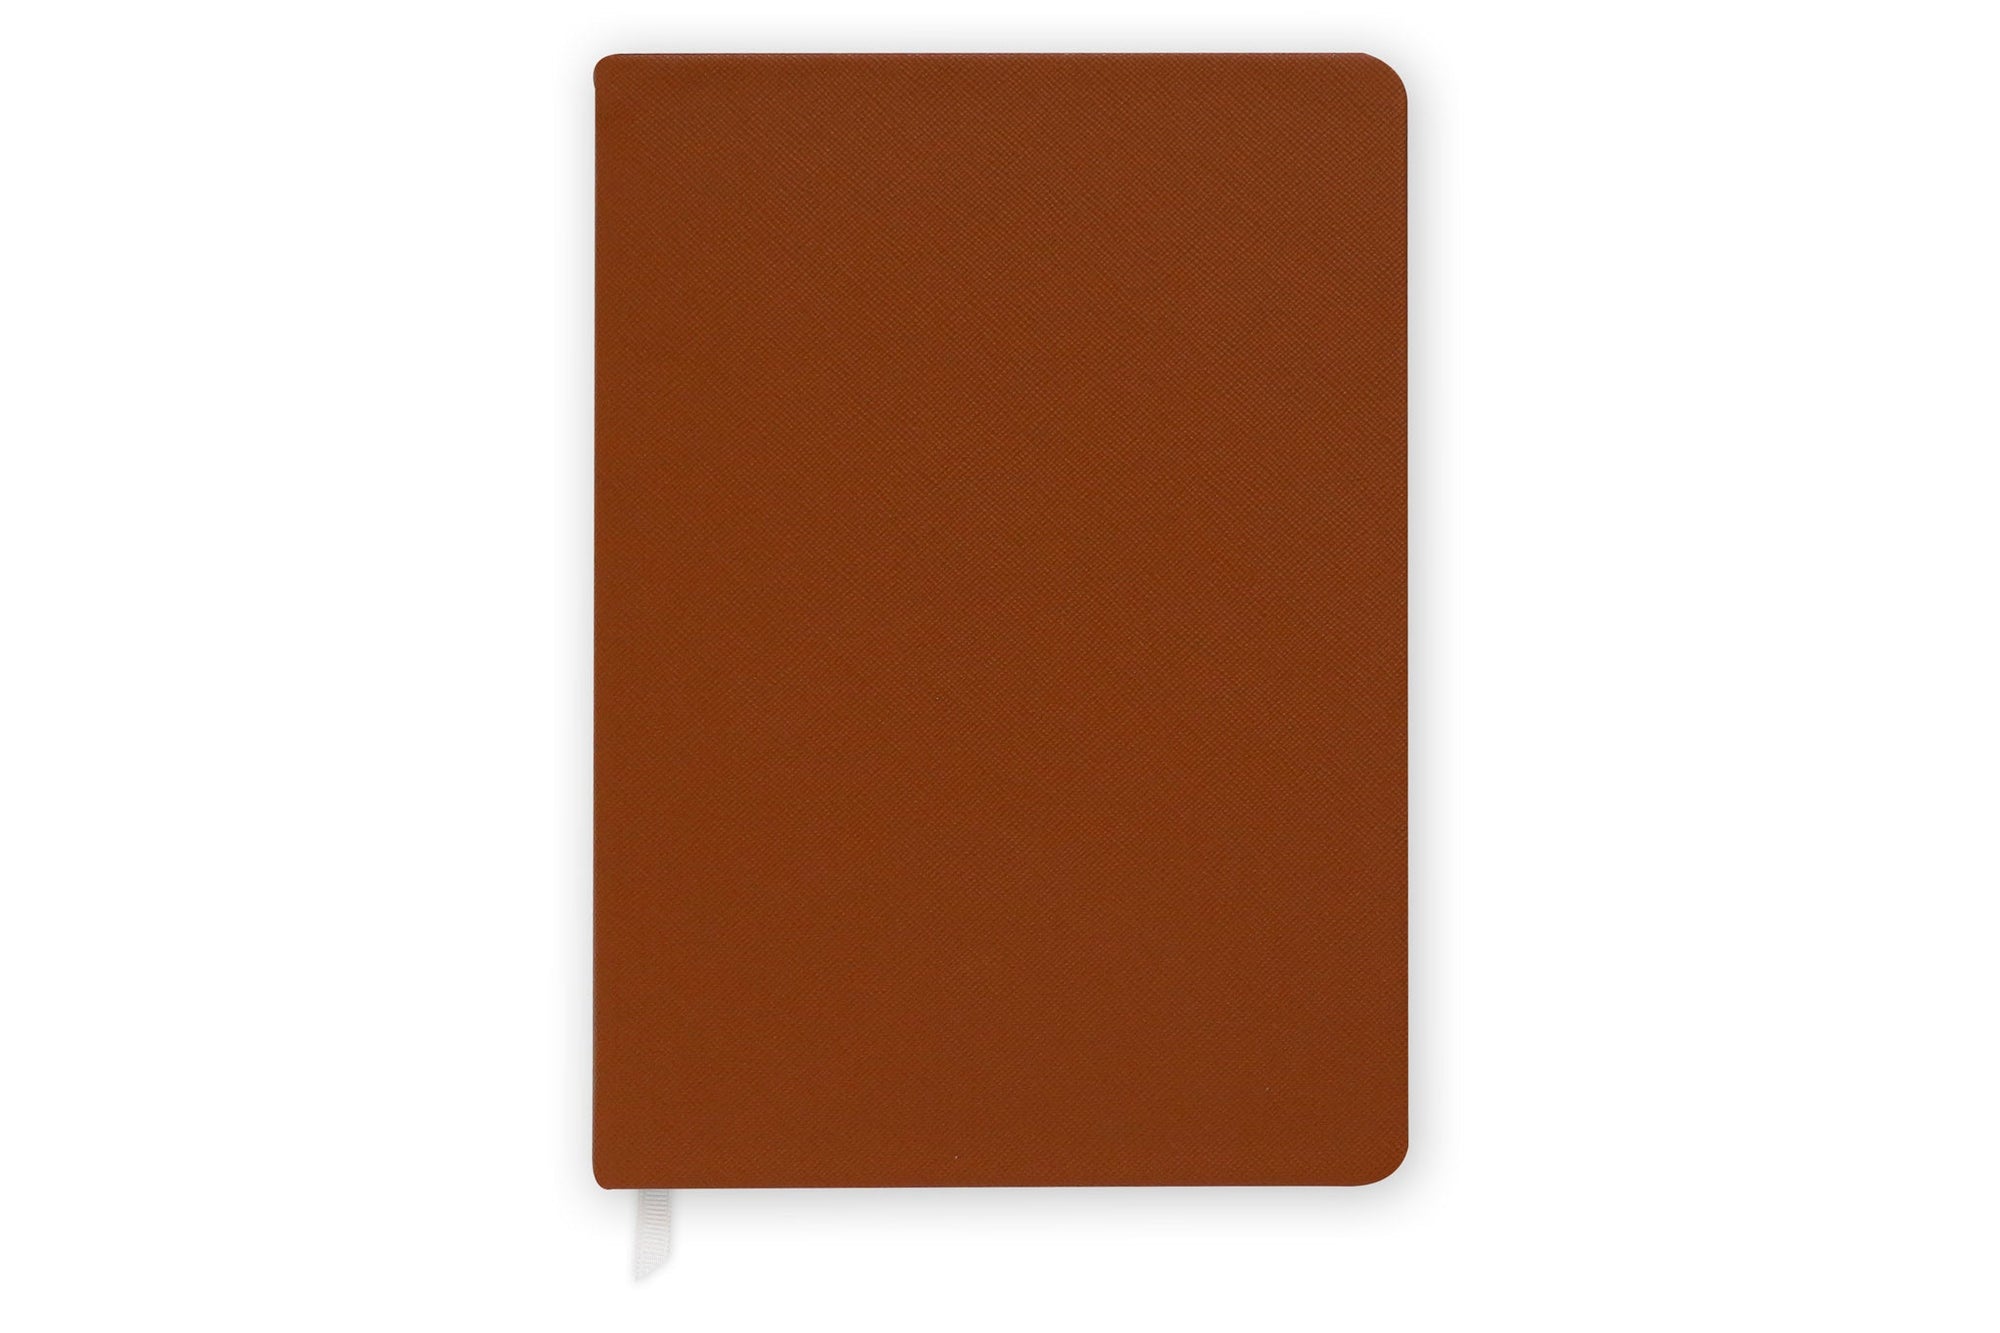 Vegan Leather Notebook, Mocha - Chapters